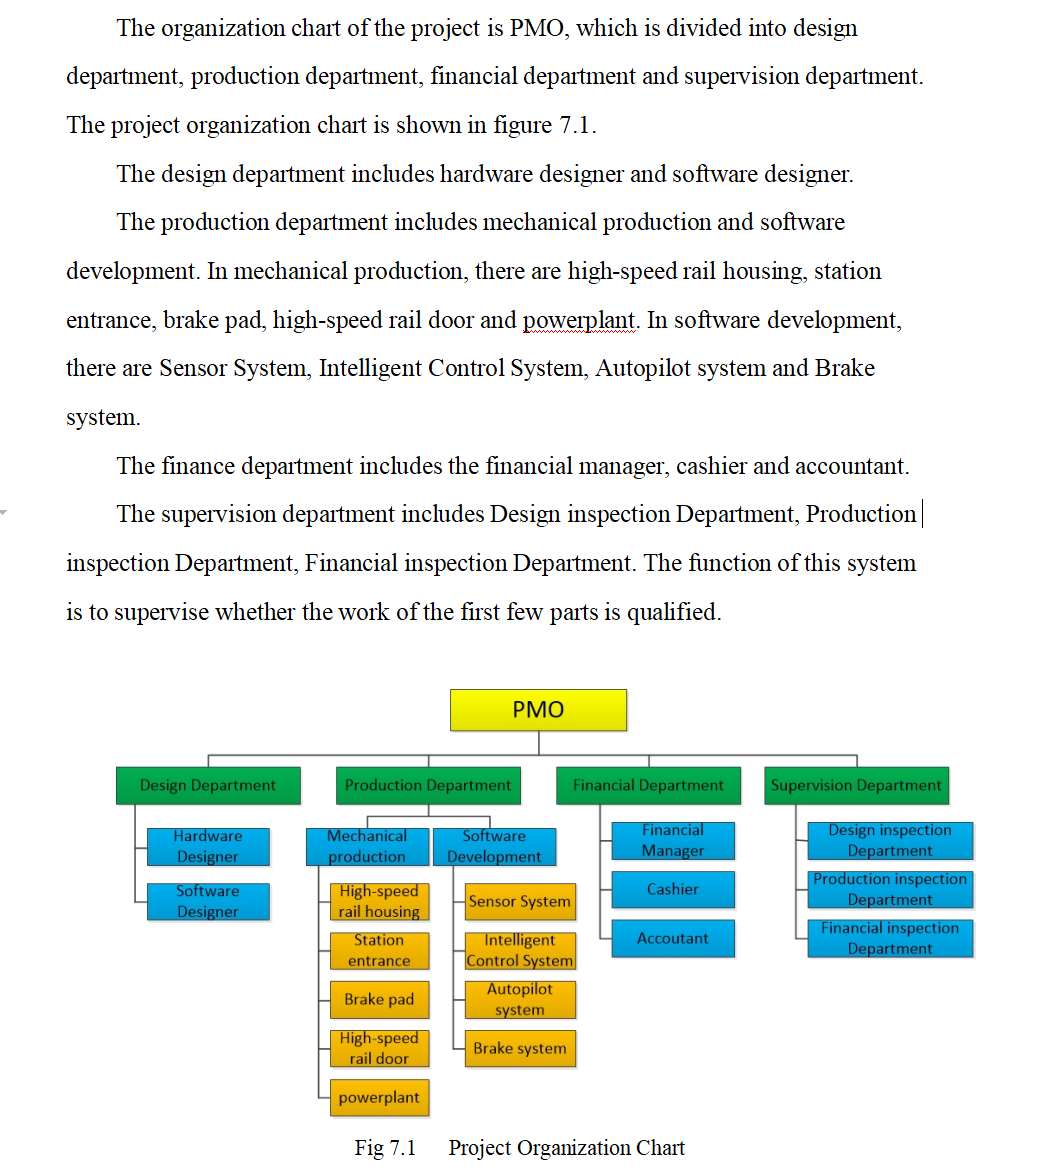 The organization chart of the project is PMO, which is divided into design
department, production department, financial department and supervision department.
The project organization chart is shown in figure 7.1.
The design department includes hardware designer and software designer.
The production department includes mechanical production and software
development. In mechanical production, there are high-speed rail housing, station
entrance, brake pad, high-speed rail door and powerplant. In software development,
there are Sensor System, Intelligent Control System, Autopilot system and Brake
system.
The finance department includes the financial manager, cashier and accountant.
The supervision department includes Design inspection Department, Production
inspection Department, Financial inspection Department. The function of this system
is to supervise whether the work of the first few parts is qualified.
Design Department
Hardware
Designer
Software
Designer
Production Department
Mechanical
production
High-speed
rail housing
Station
entrance
Brake pad
High-speed
rail door
powerplant
Fig 7.1
PMO
Software
Development
Sensor System
Intelligent
Control System
Autopilot
system
Financial Department
Brake system
Financial
Manager
Cashier
Accoutant
Project Organization Chart
Supervision Department
Design inspection
Department
Production inspection
Department
Financial inspection
Department